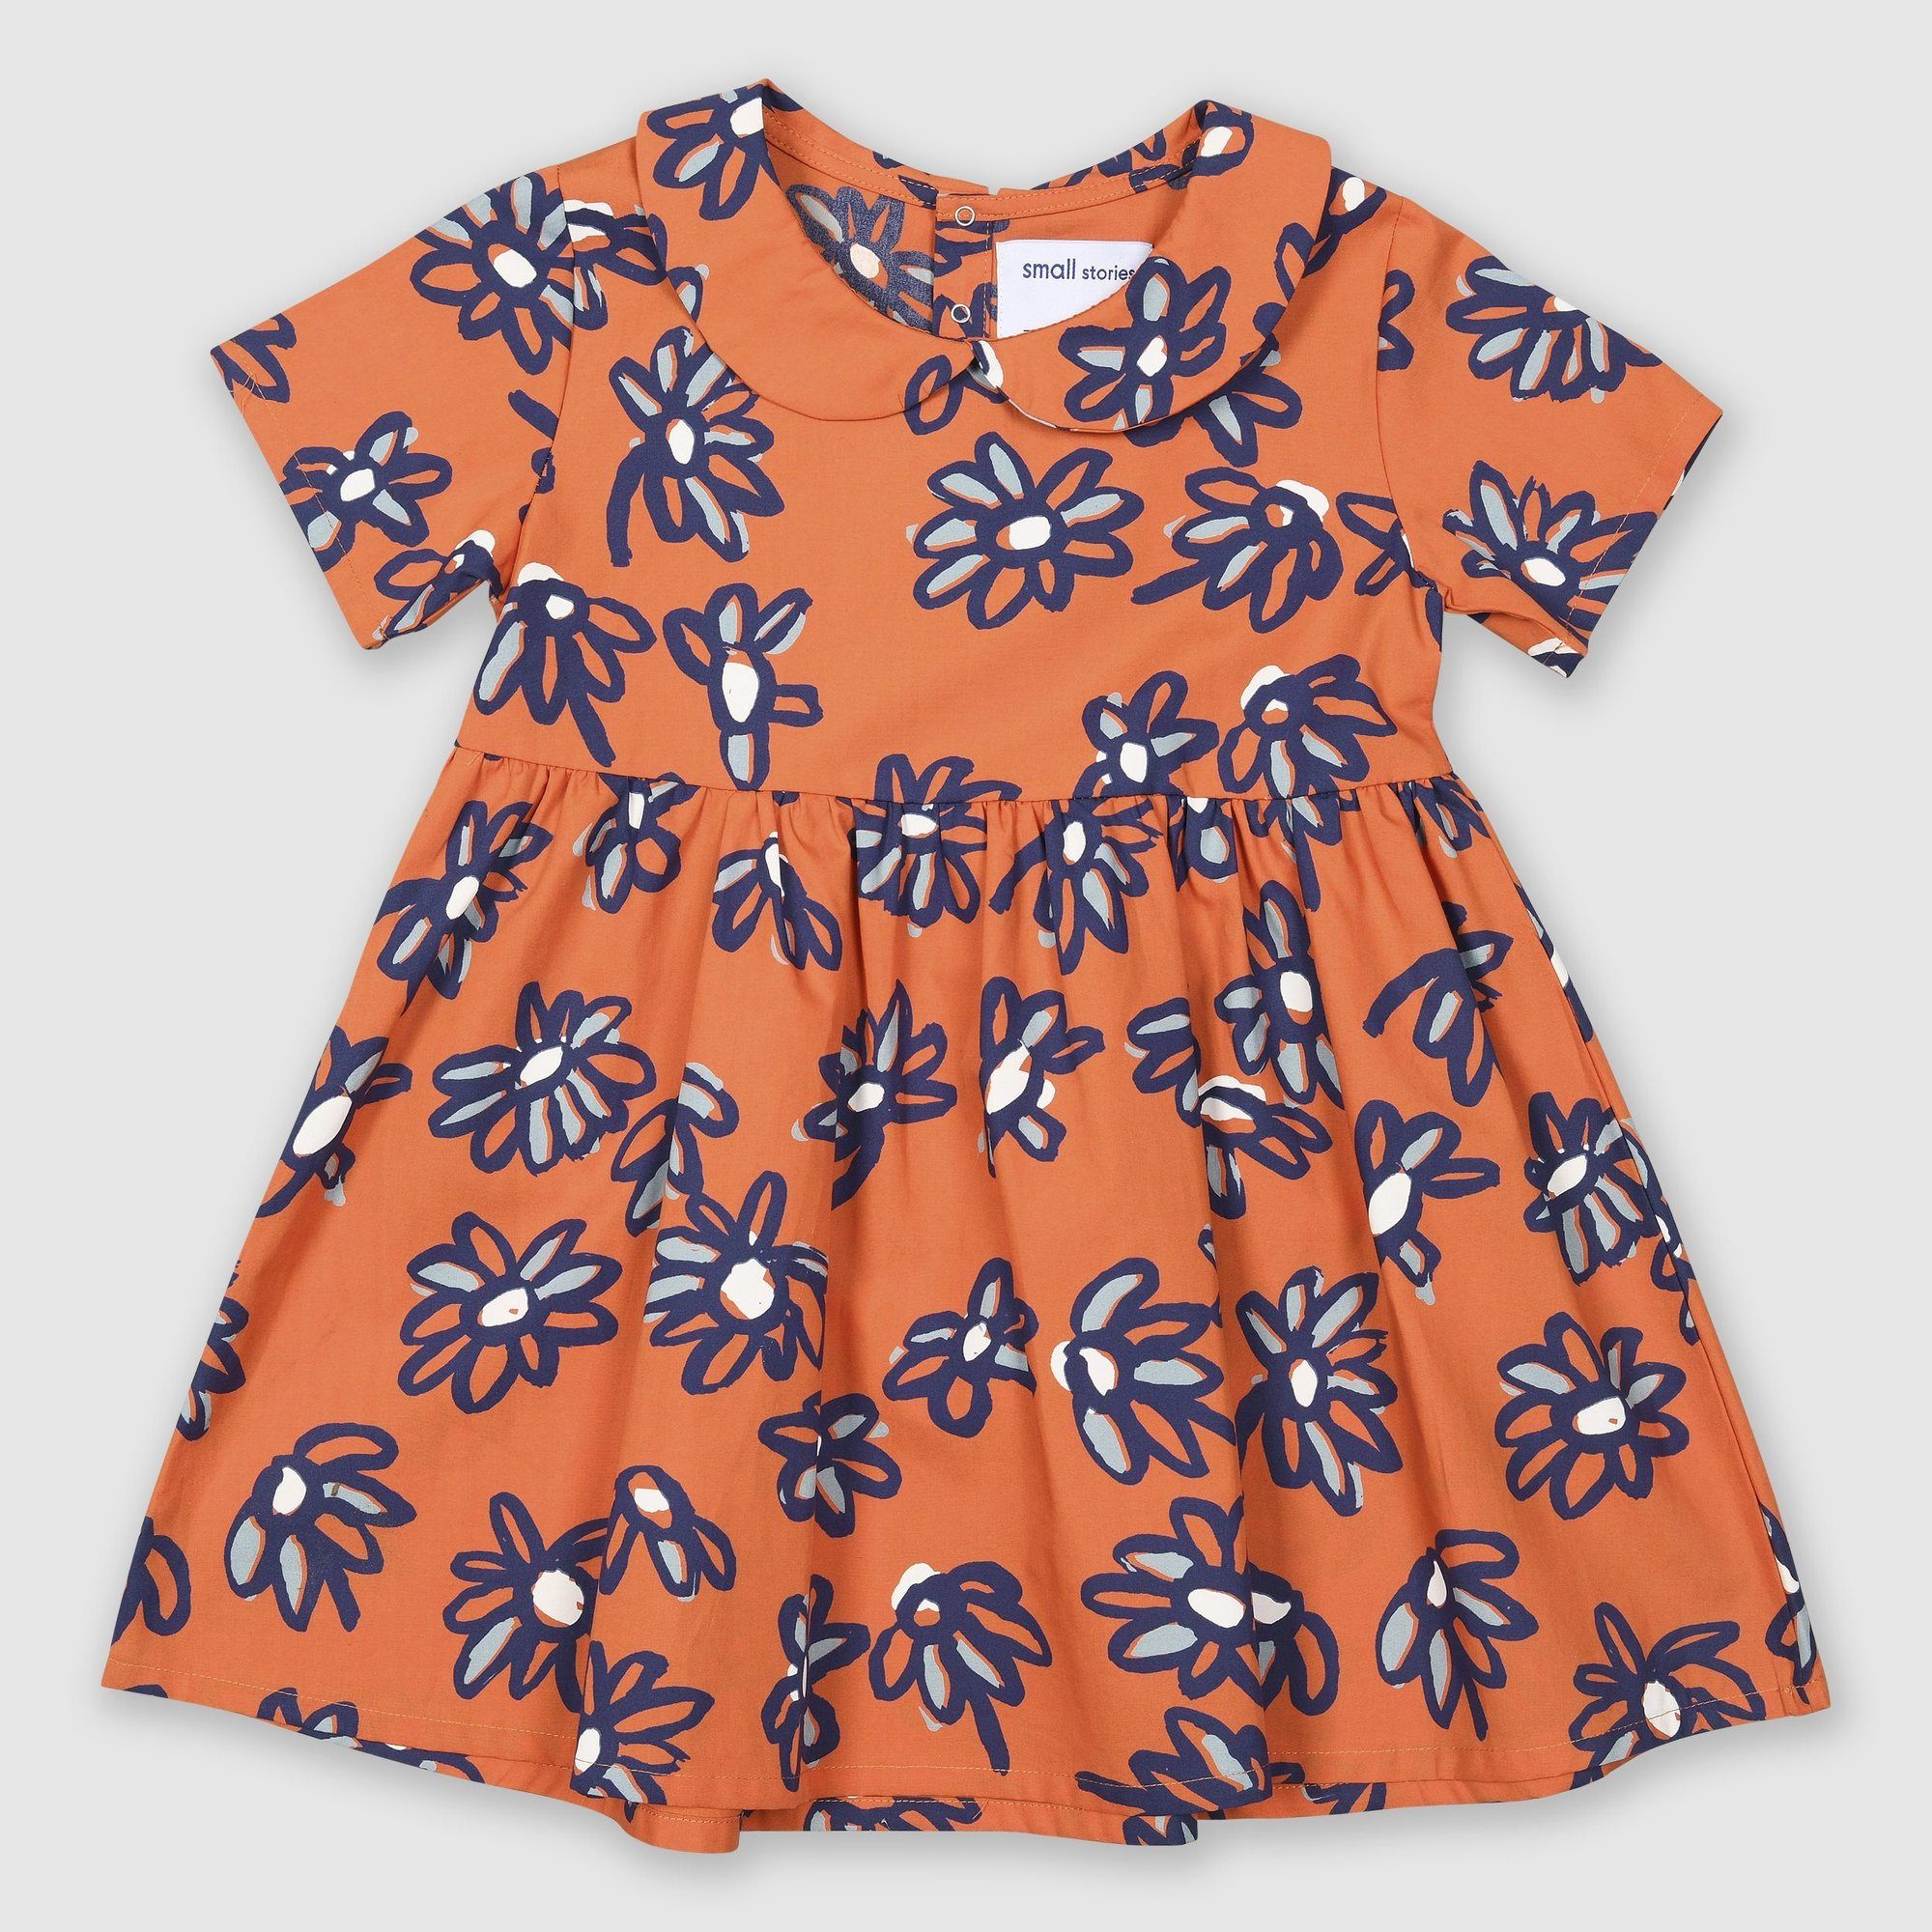 Lightweight 100% cotton dress with our bespoke painted daisy print in orange with blues and white. Features a Peter Pan Collar and press stud back opening for ease of dressing.